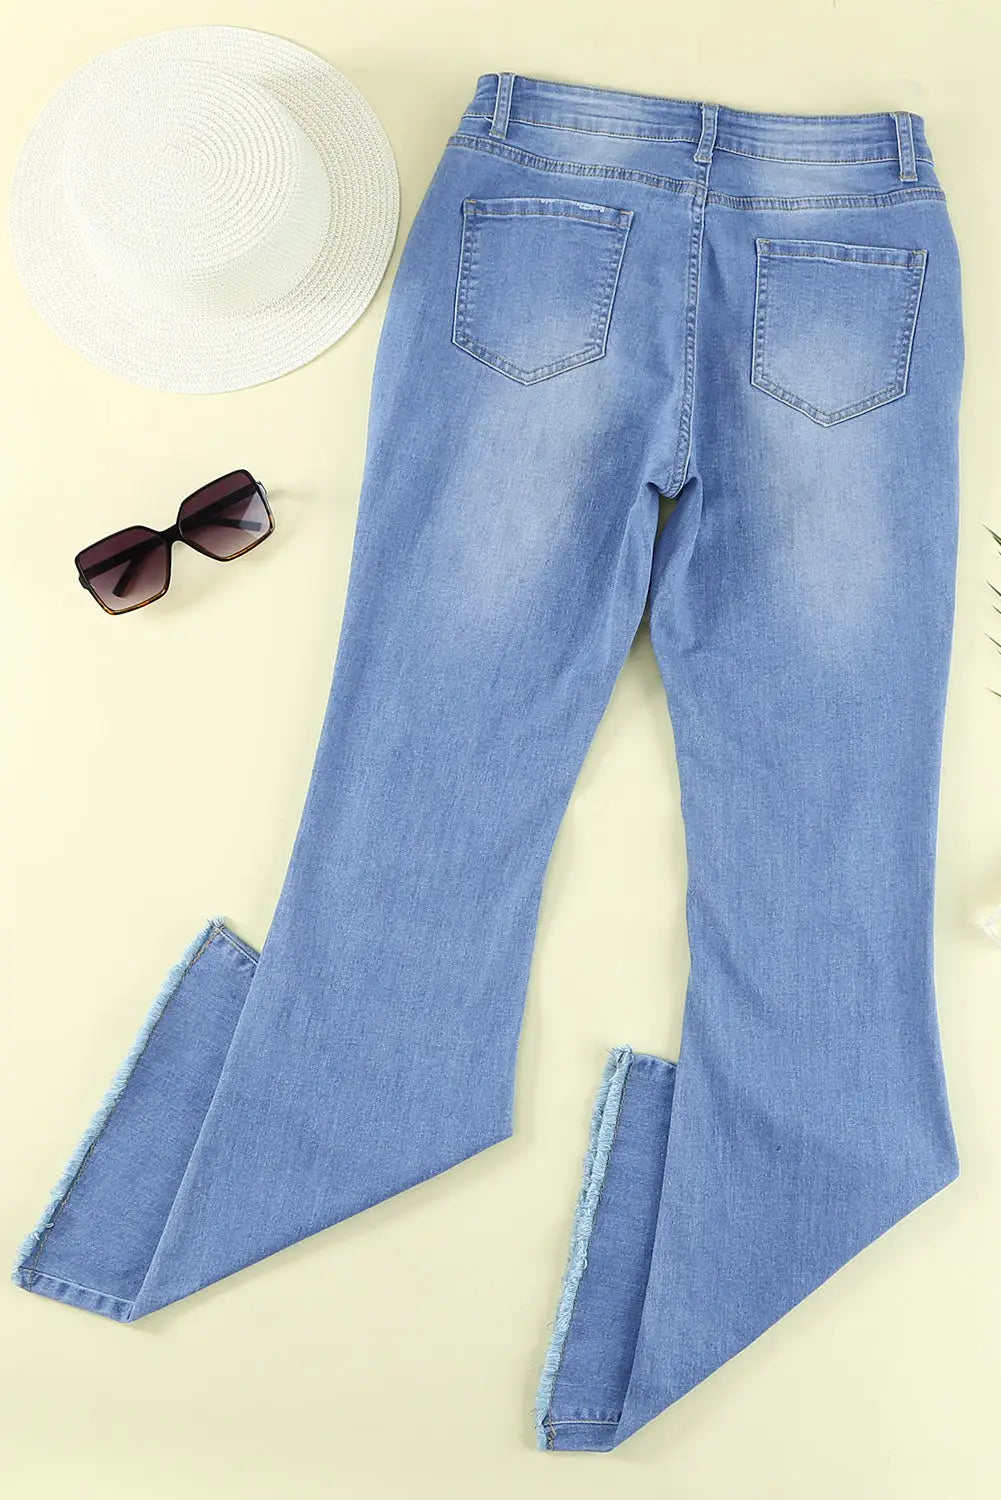 Sky blue high rise distressed bell bottom denims - jeans